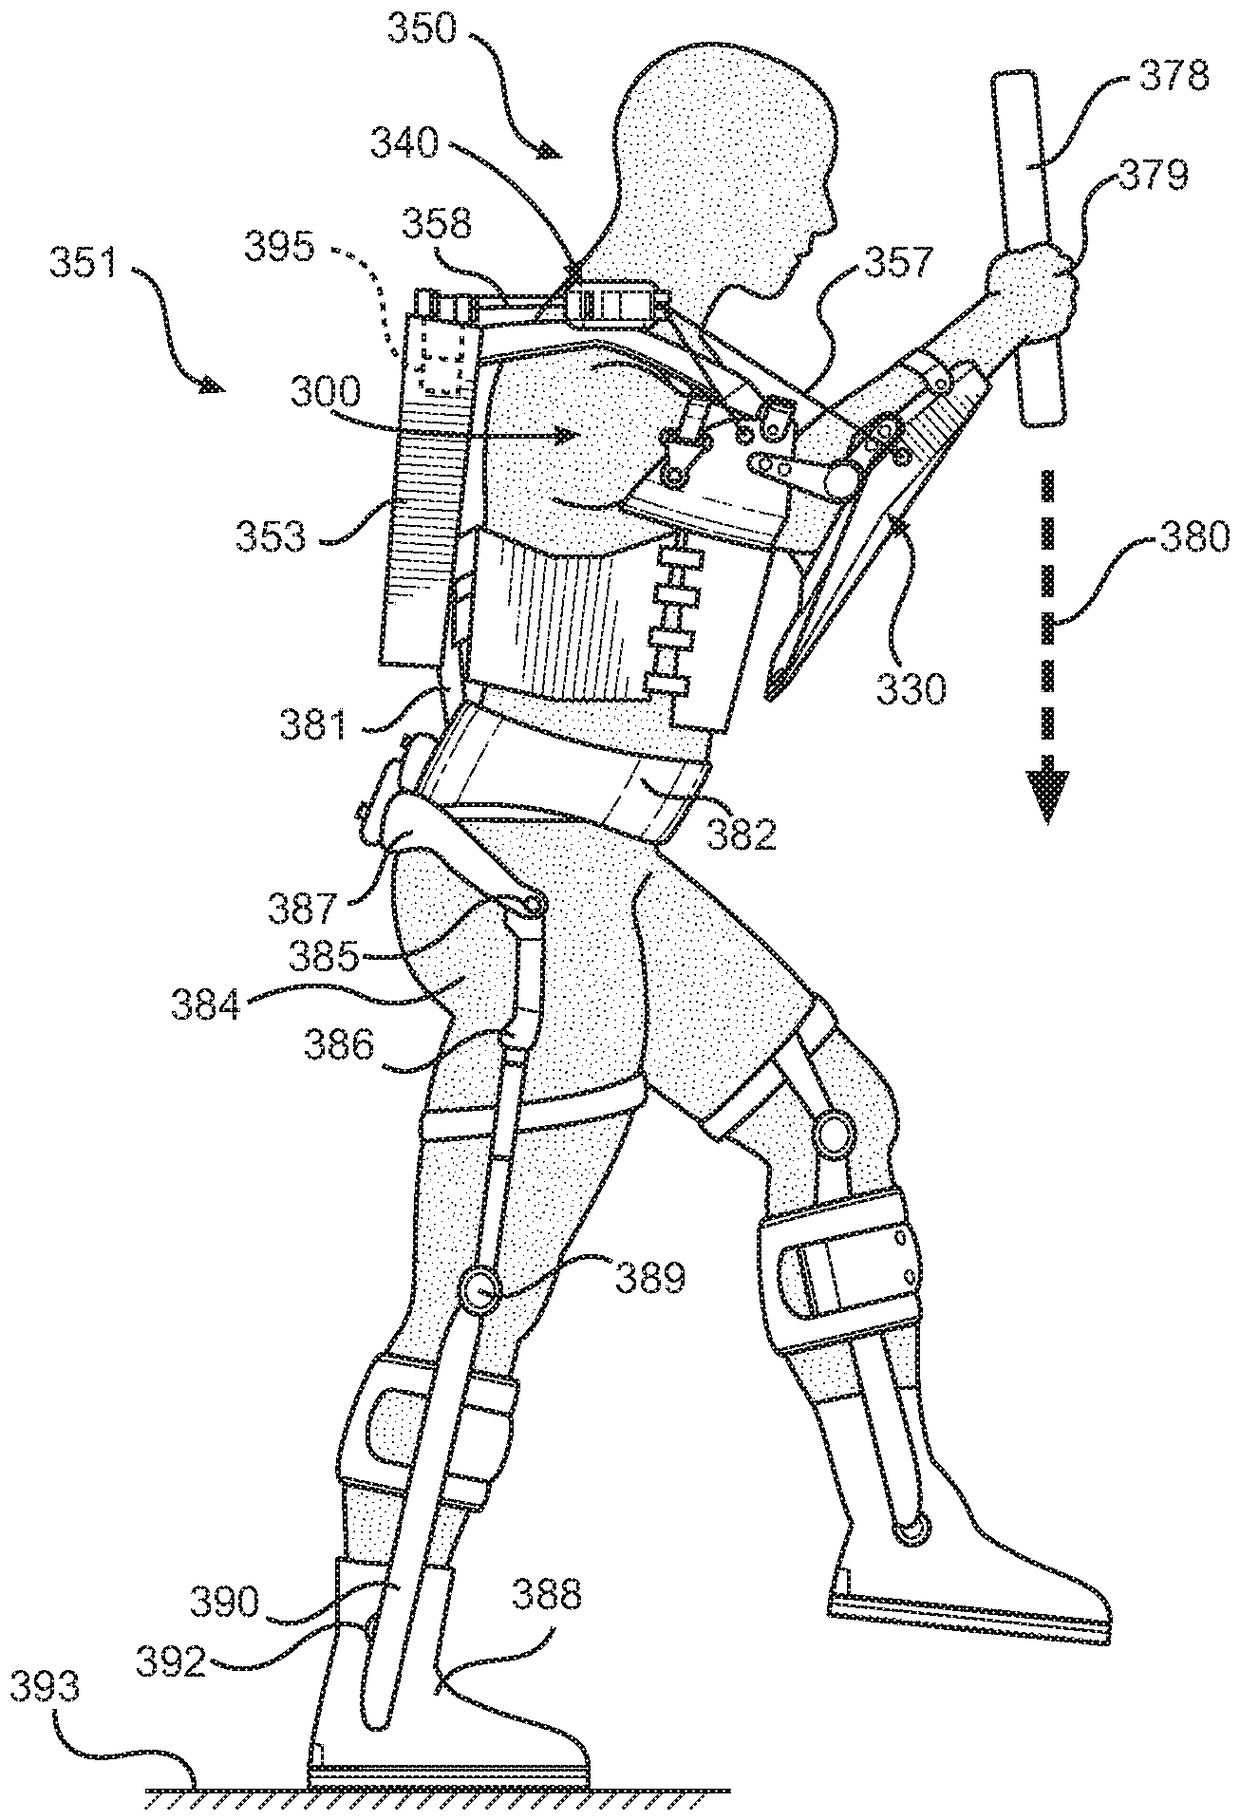 Device and method for strengthening the arms of huaman exoskeletons